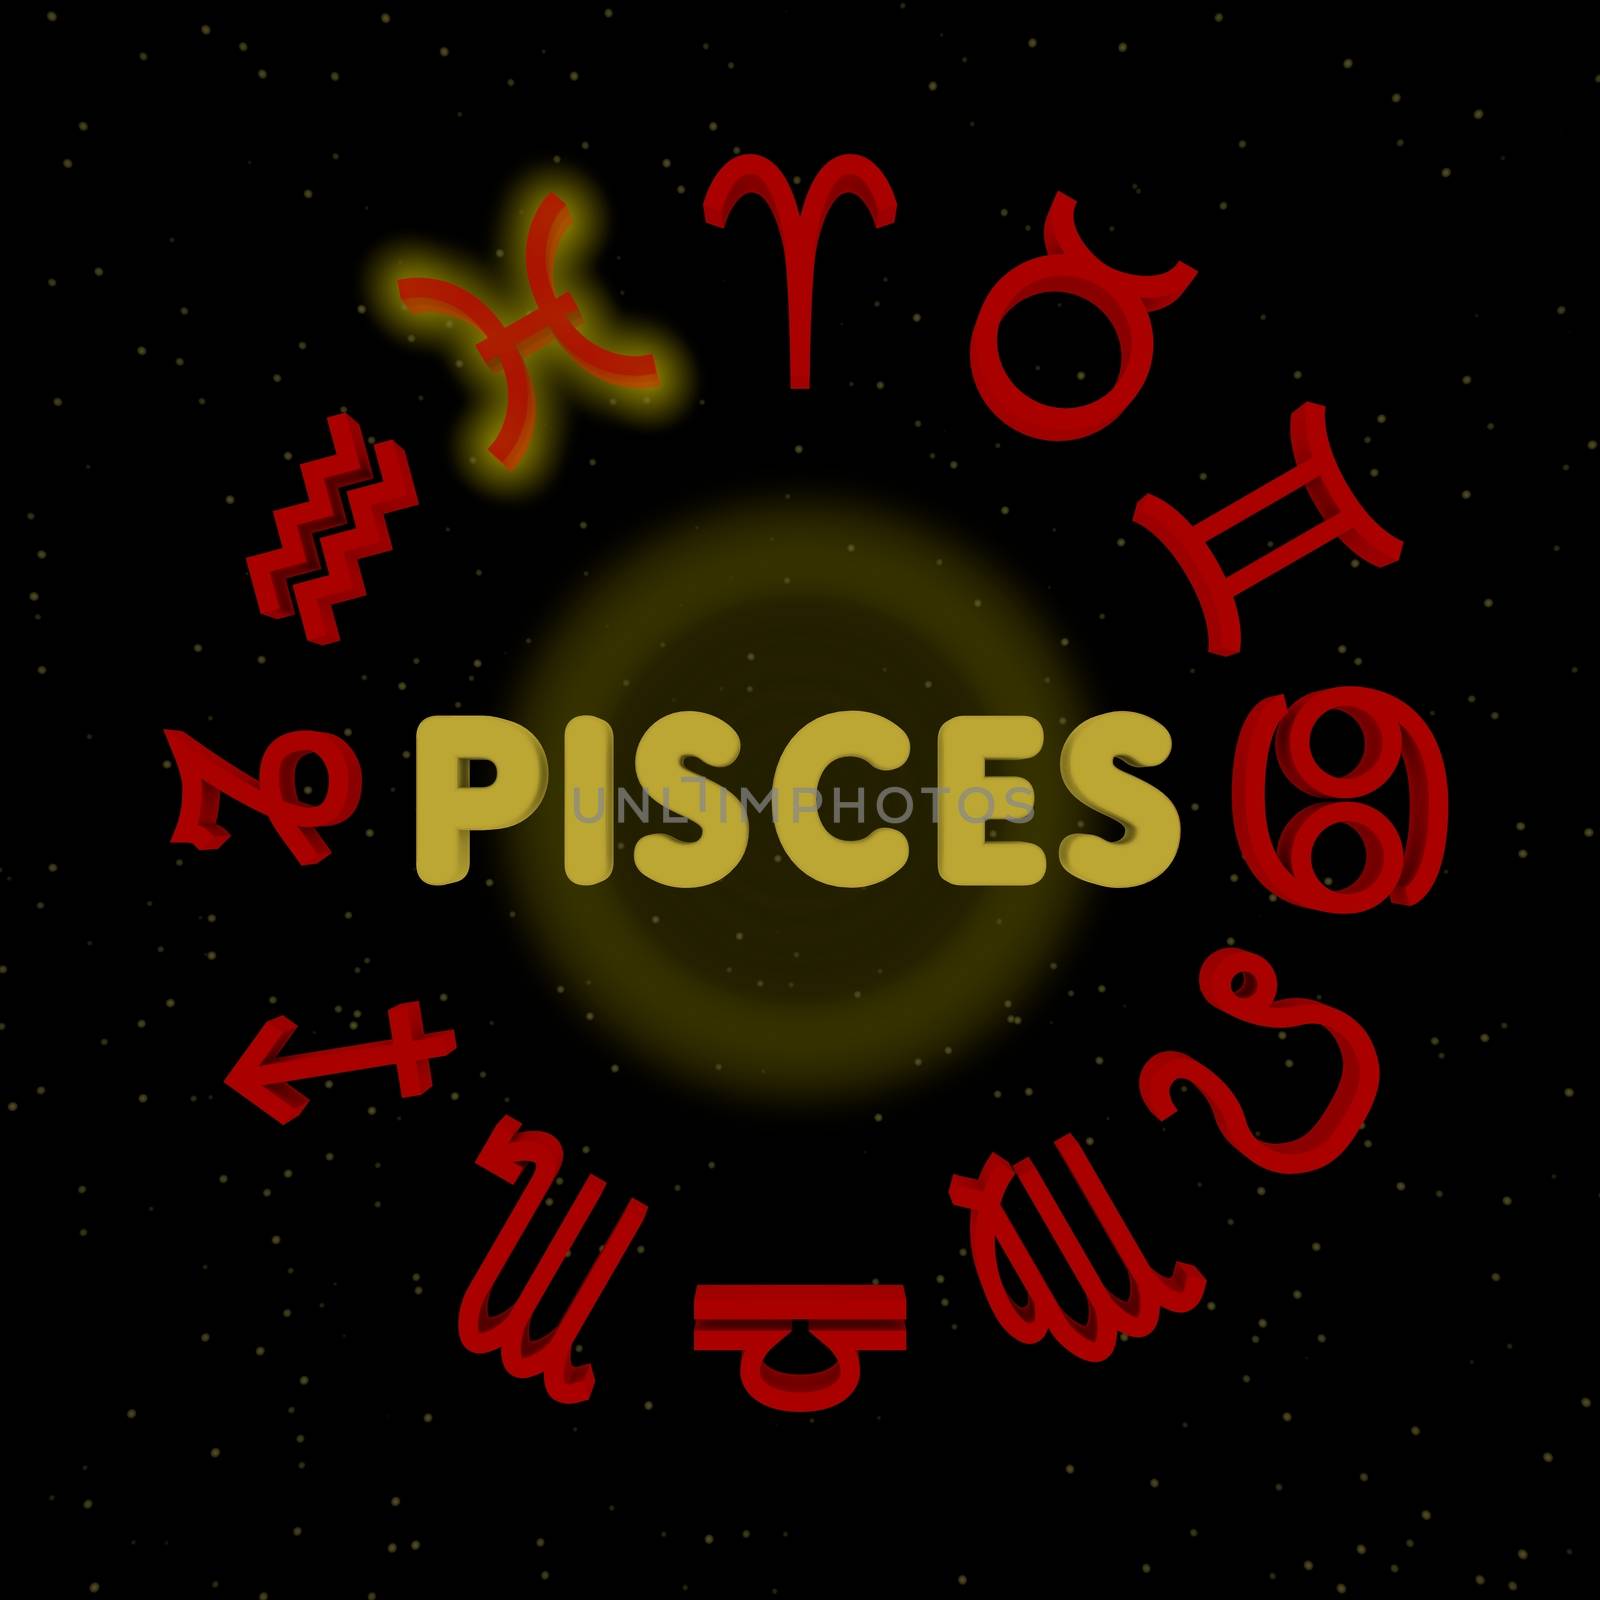 3d zodiac signs with PISCES highlighted